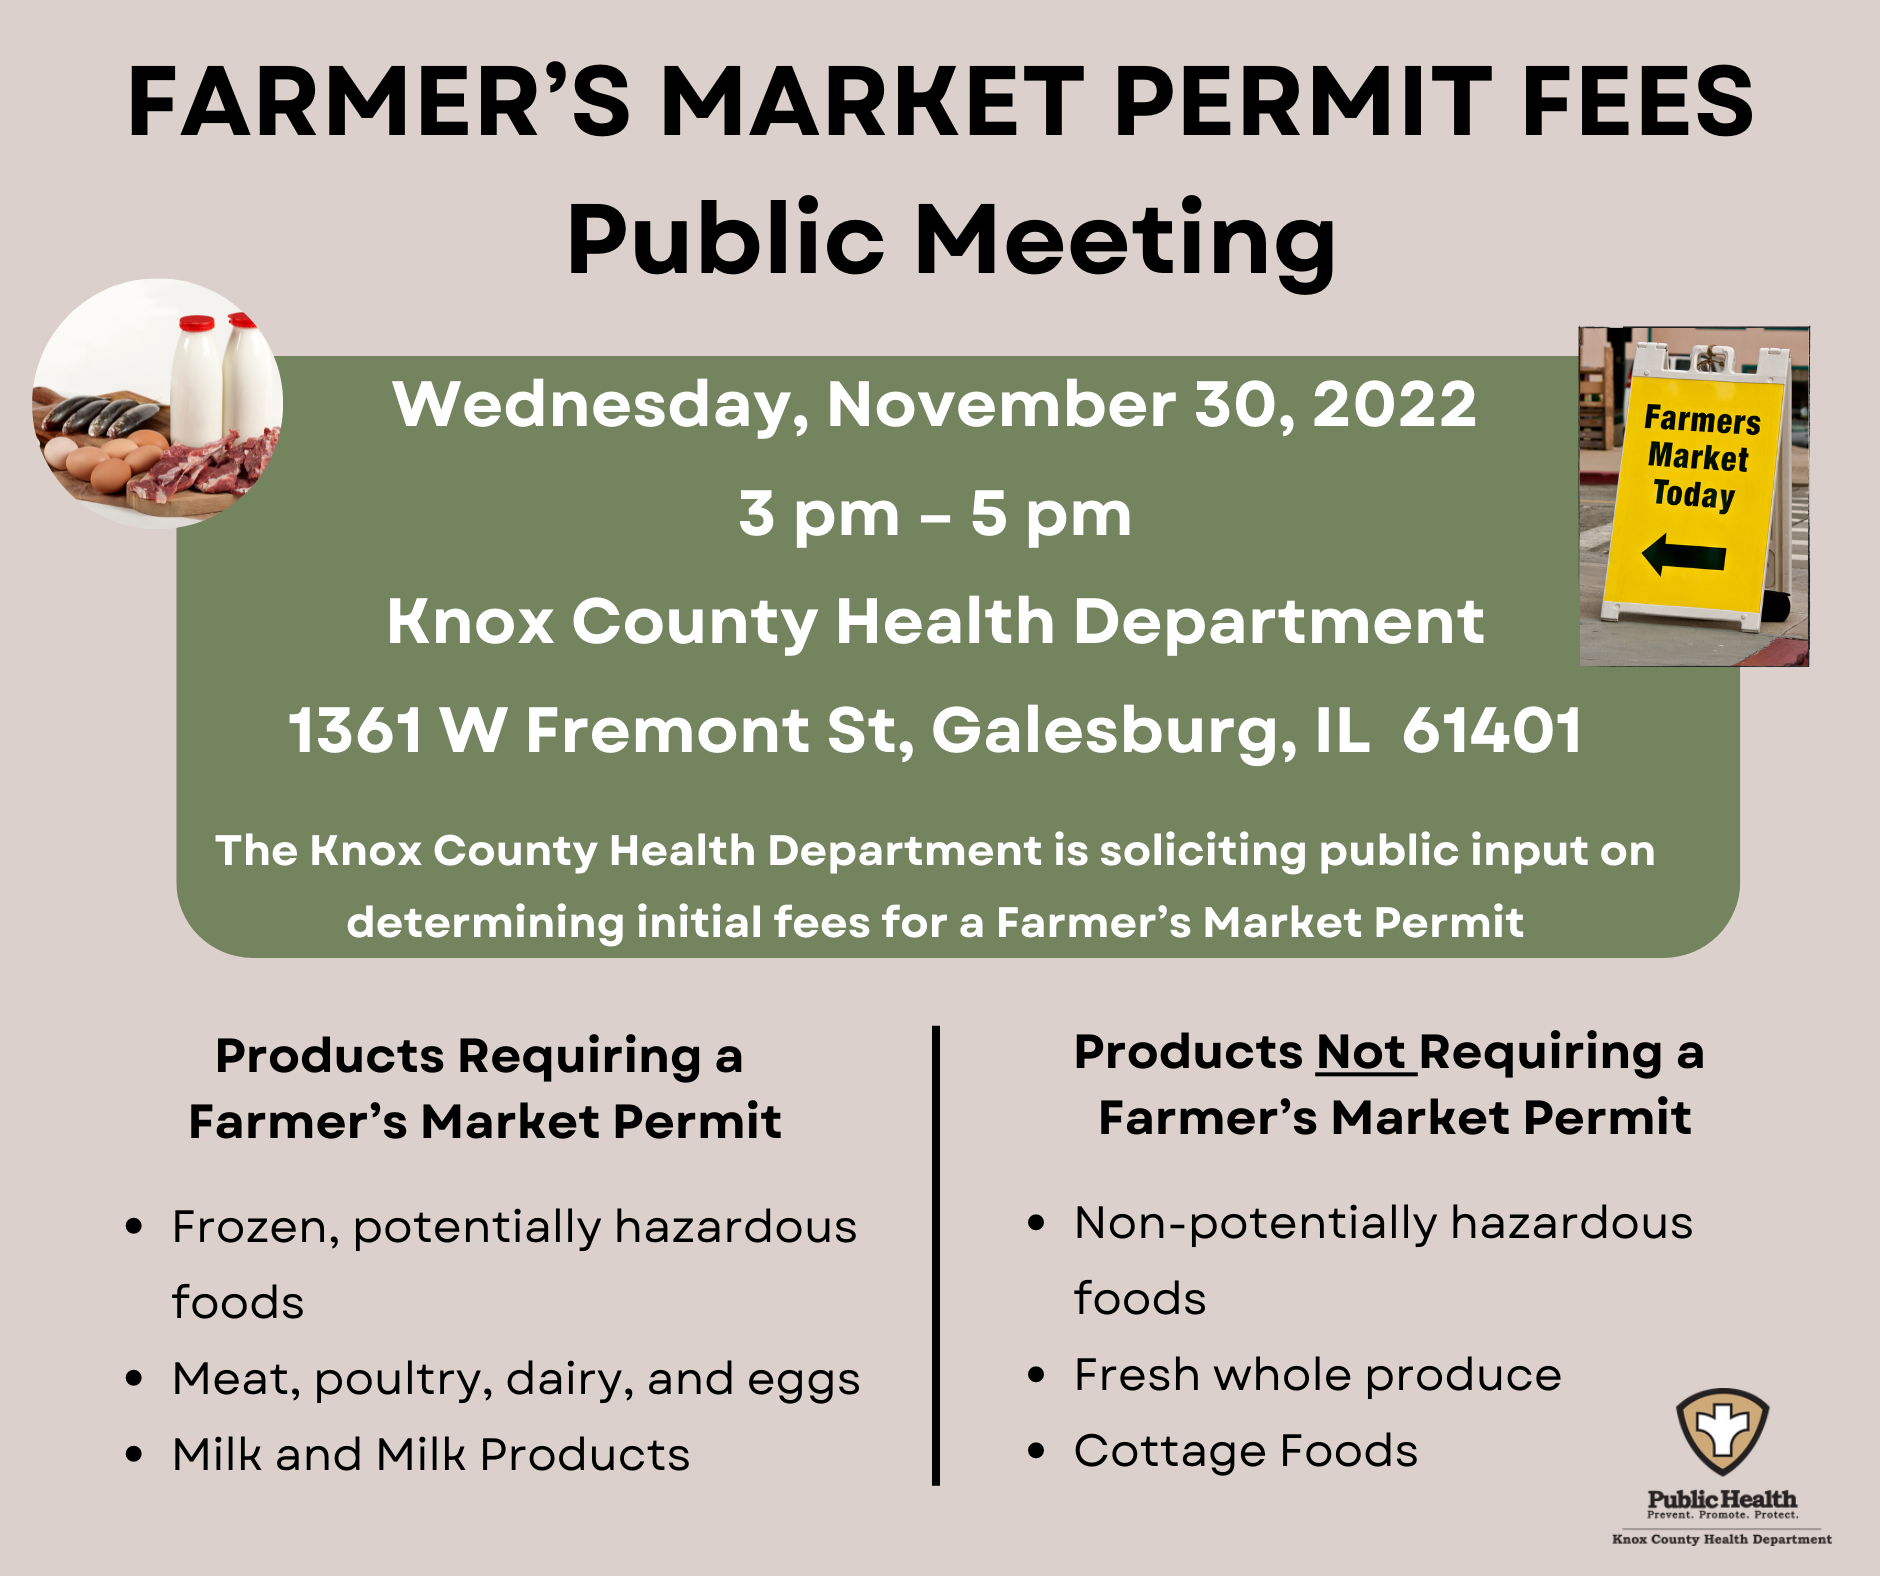 CHANGES COMING TO FARMER’S MARKETS FARMER’S MARKET PERMIT PUBLIC ACT 102-0862 Effective 1-1-2023 (8)